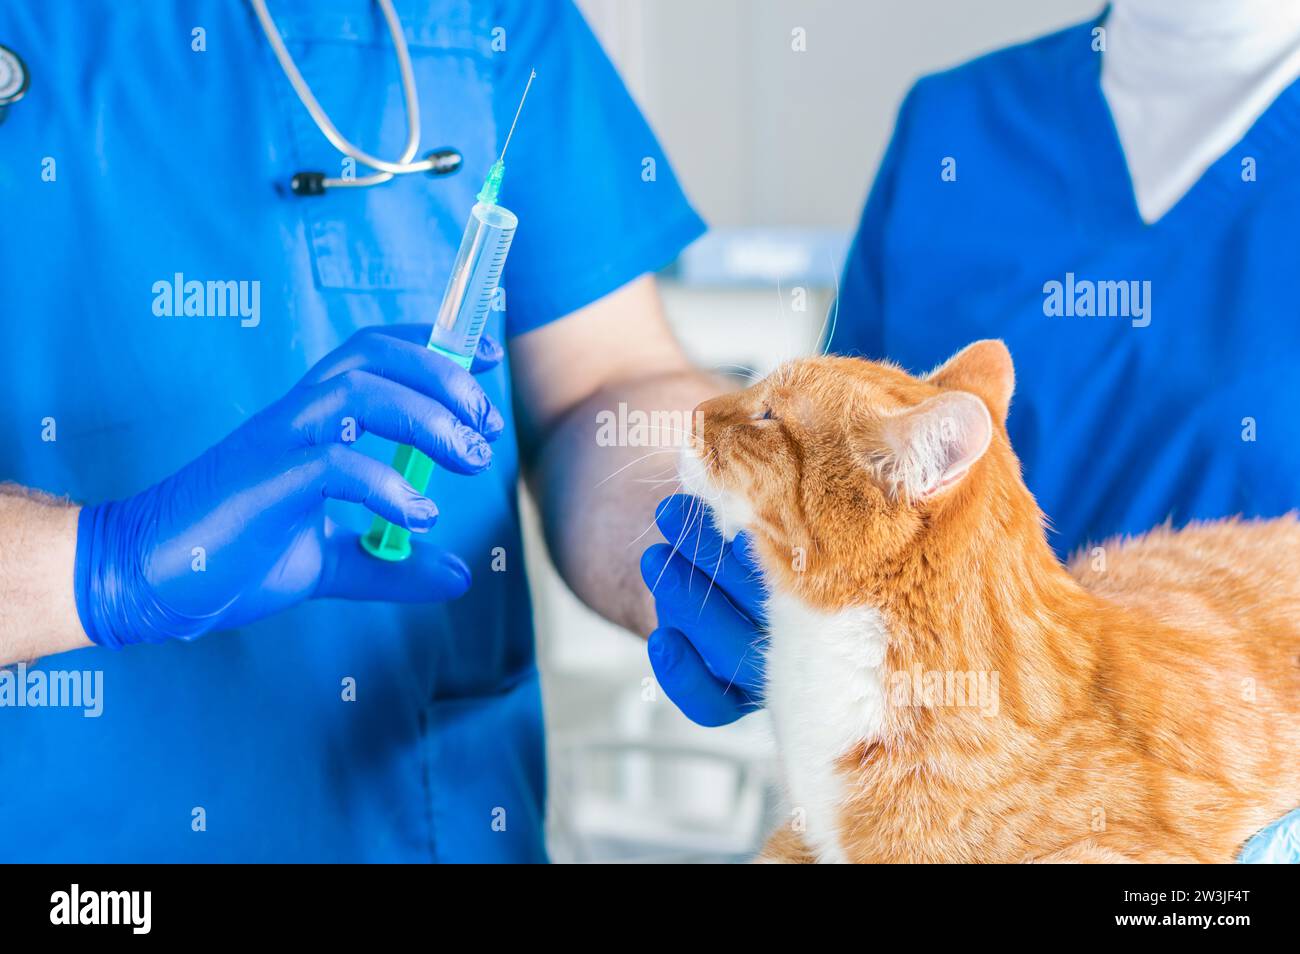 Image of the doctor's hands with a syringe in his hands. A ginger cat in the arms of a nurse. Veterinary medicine concept. Mixed media Stock Photo